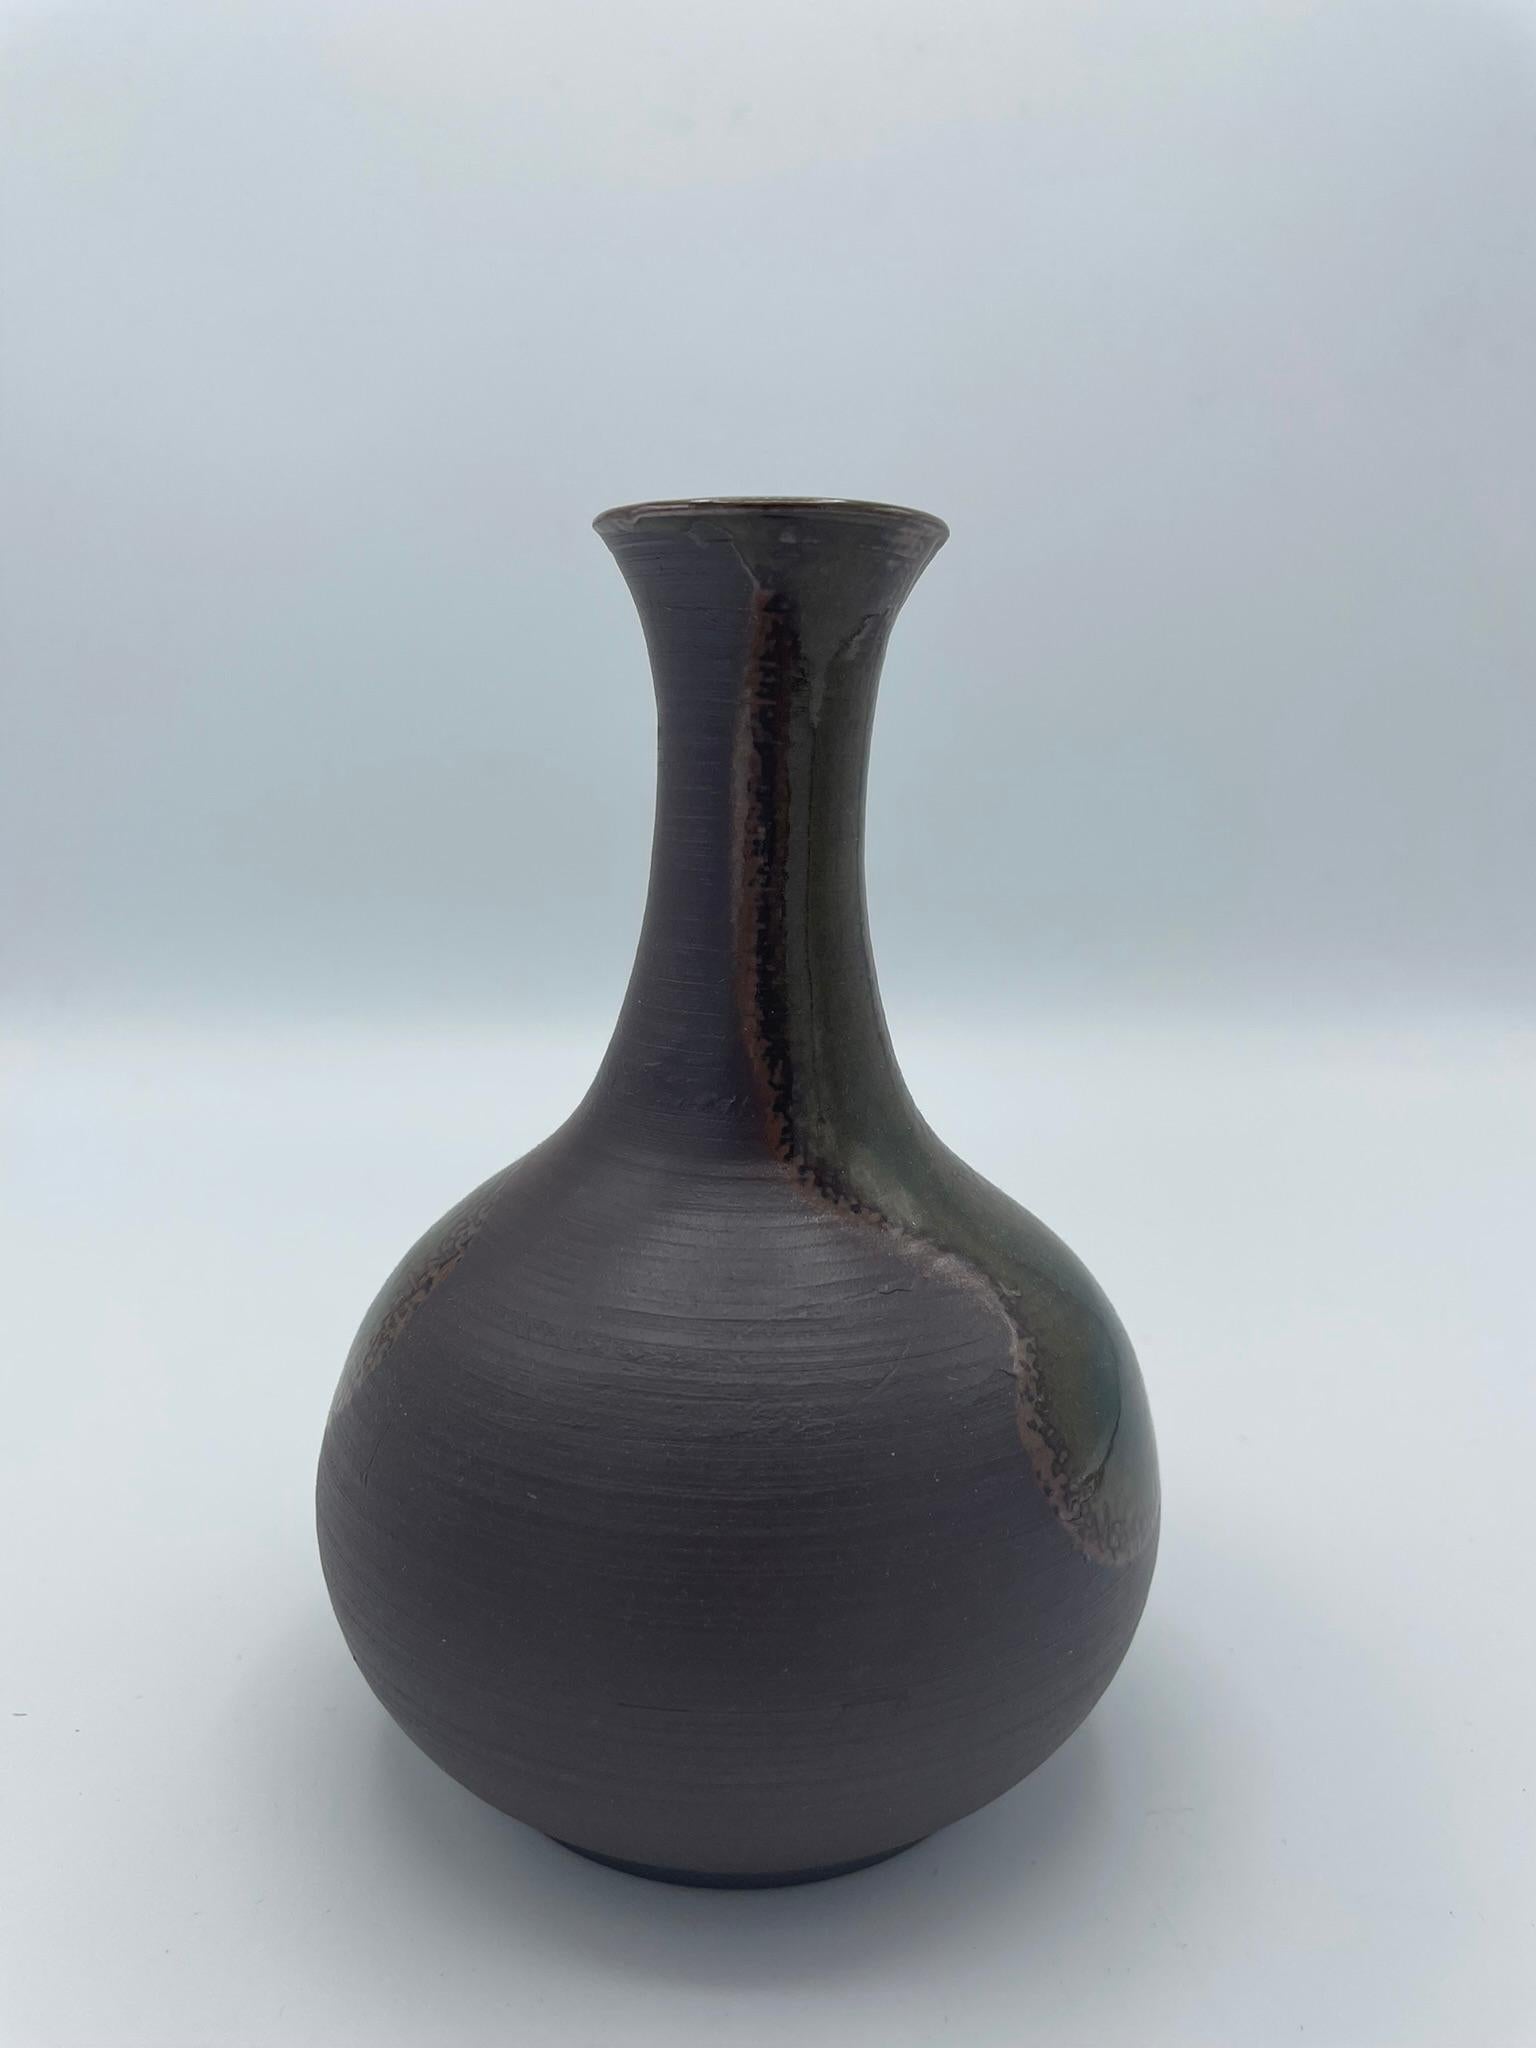 This is a flower vase made around 1970s and with style Tokoname.

Tokoname-yaki (Tokoname ware) is a type of Japanese pottery, stone ware and ceramics, and it is the one of the Six Ancient Kilns of Japan.
Tokoname ware is made in Aichi